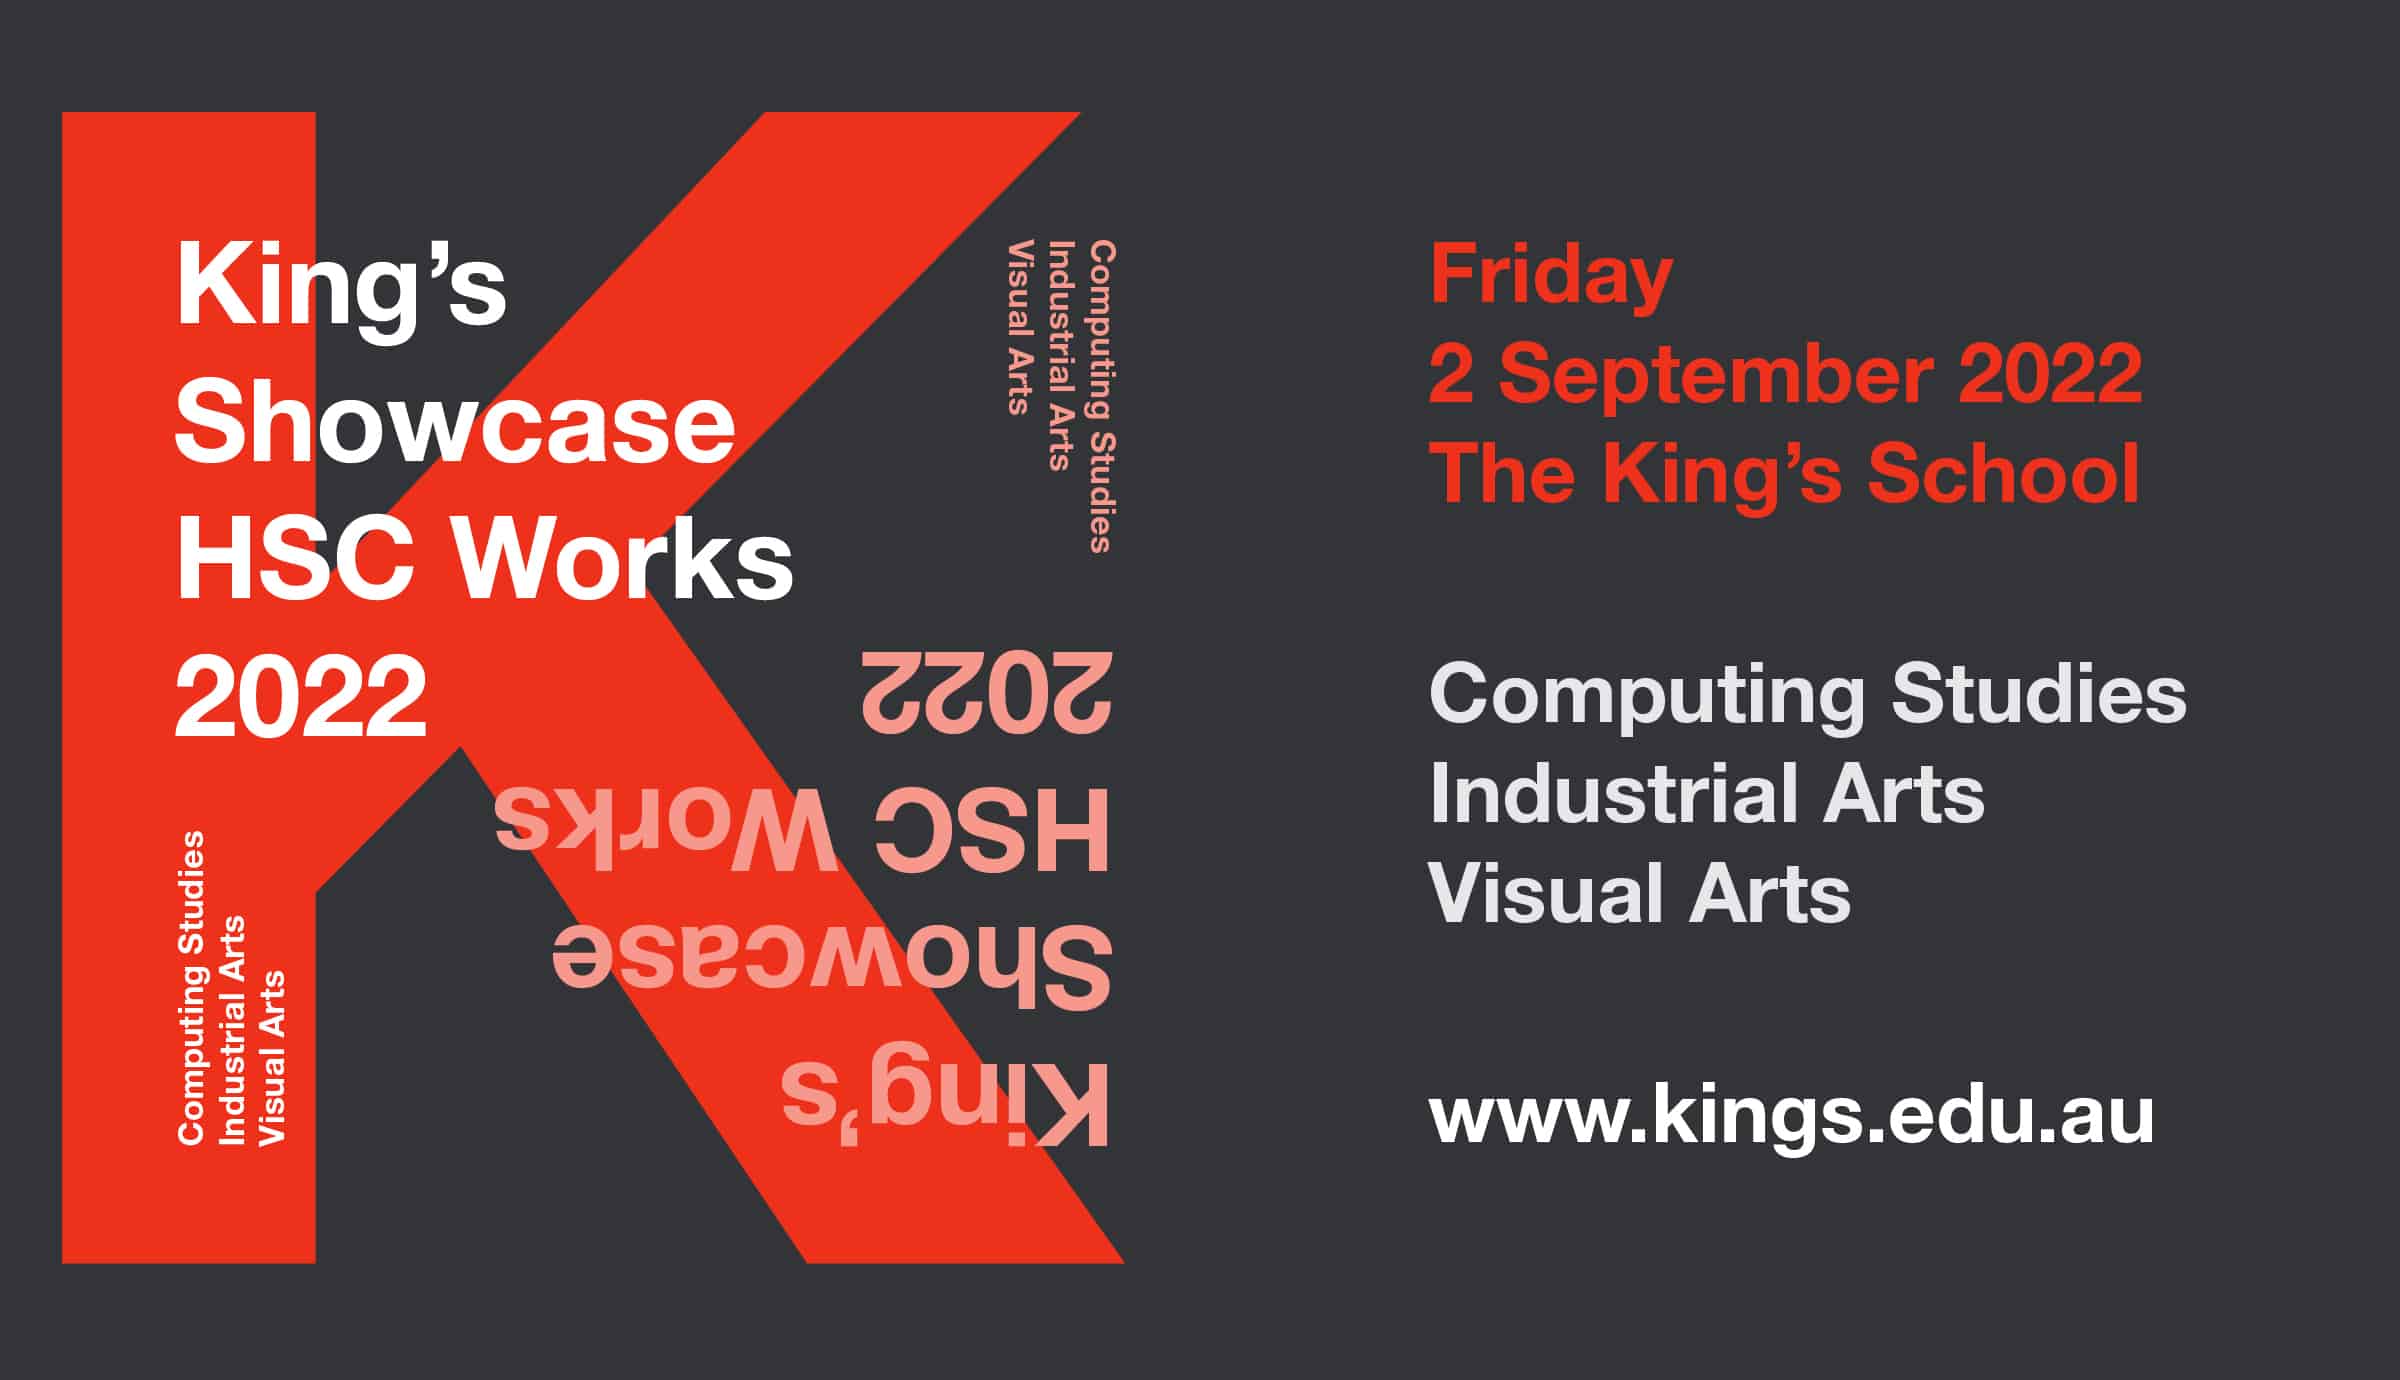 The King's School Showcase HSC Works 2022